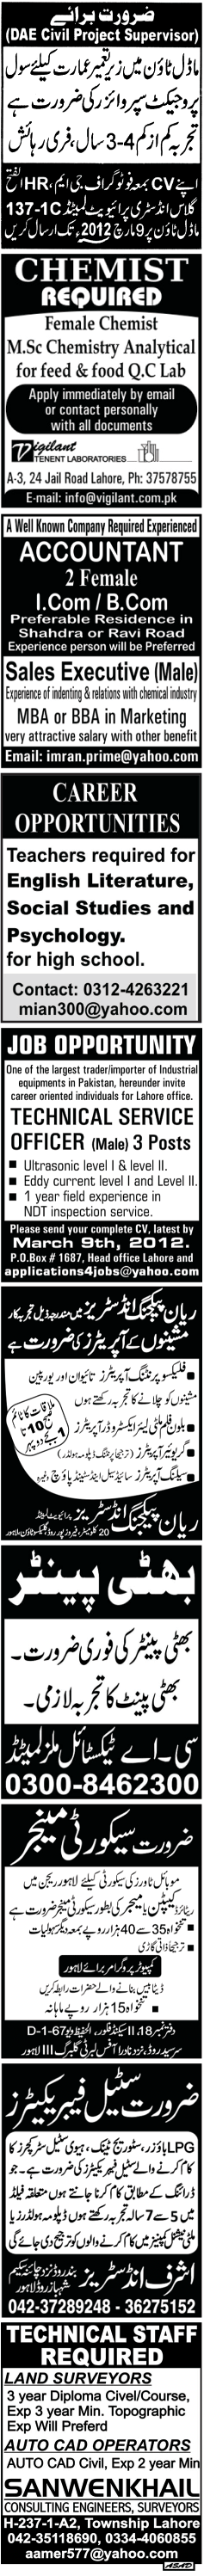 Misc. Jobs in Lahore Jang Classified 9